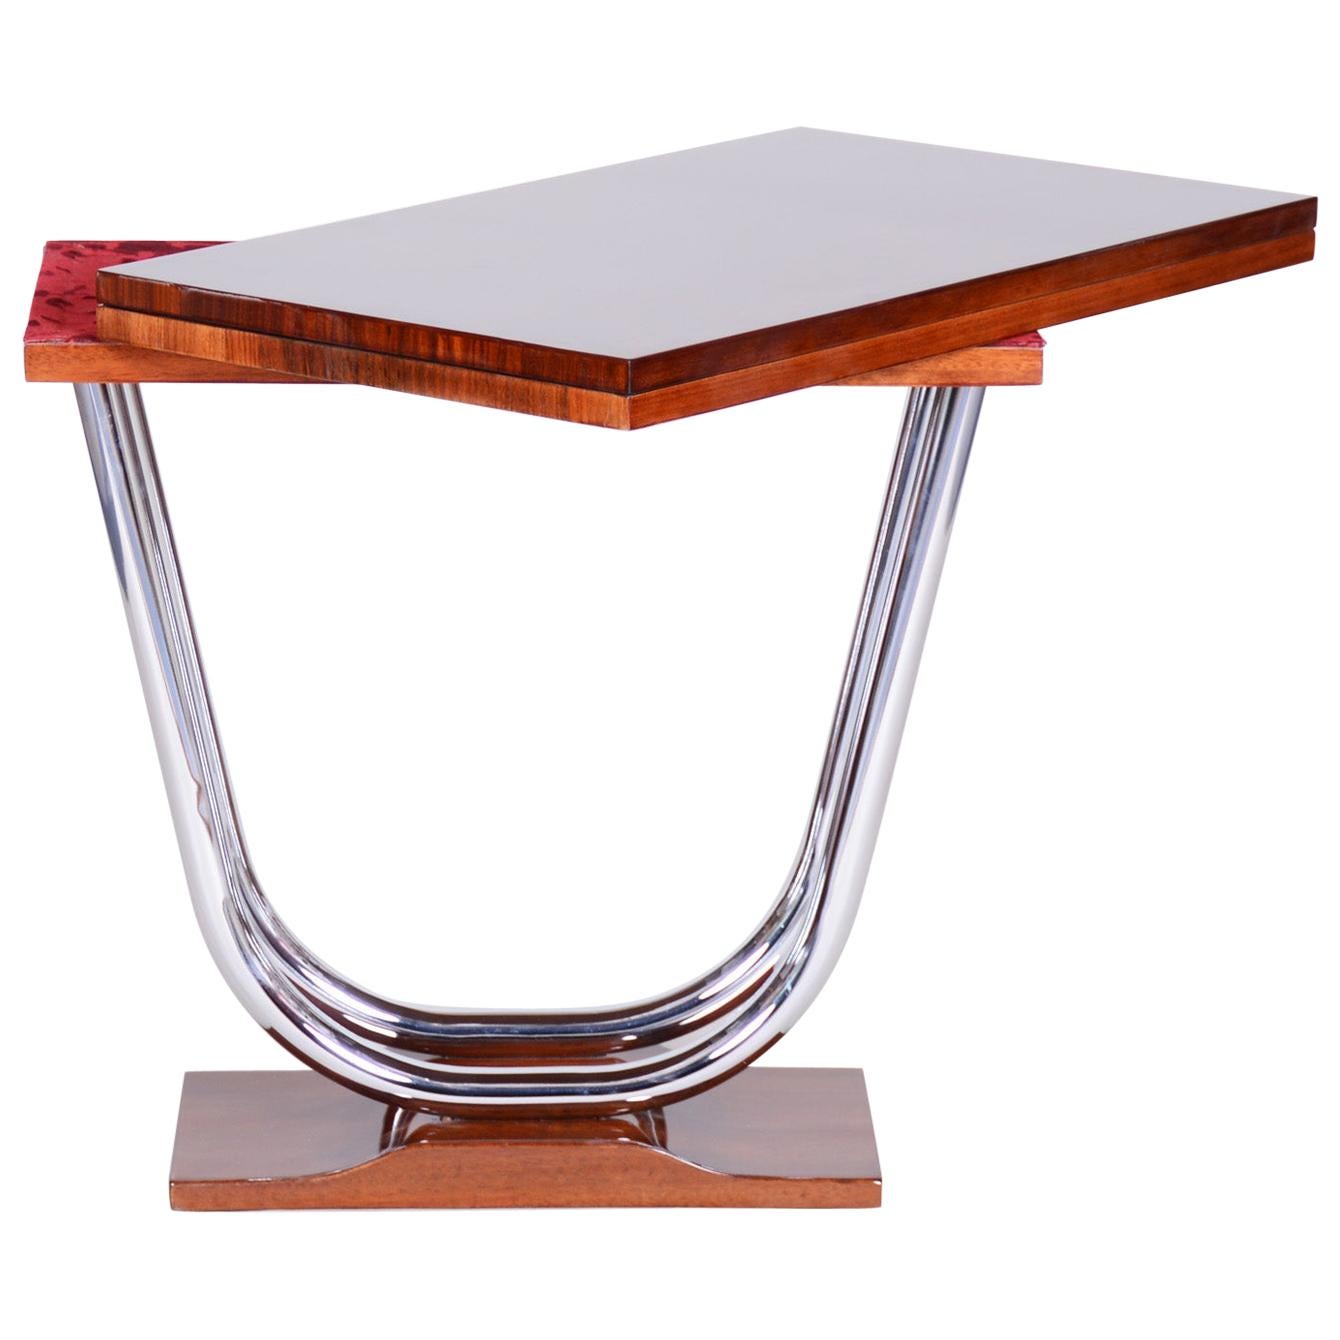 Unique Extendable Art Deco Coffee - Card Table, Chrome and Palisander, 1920s